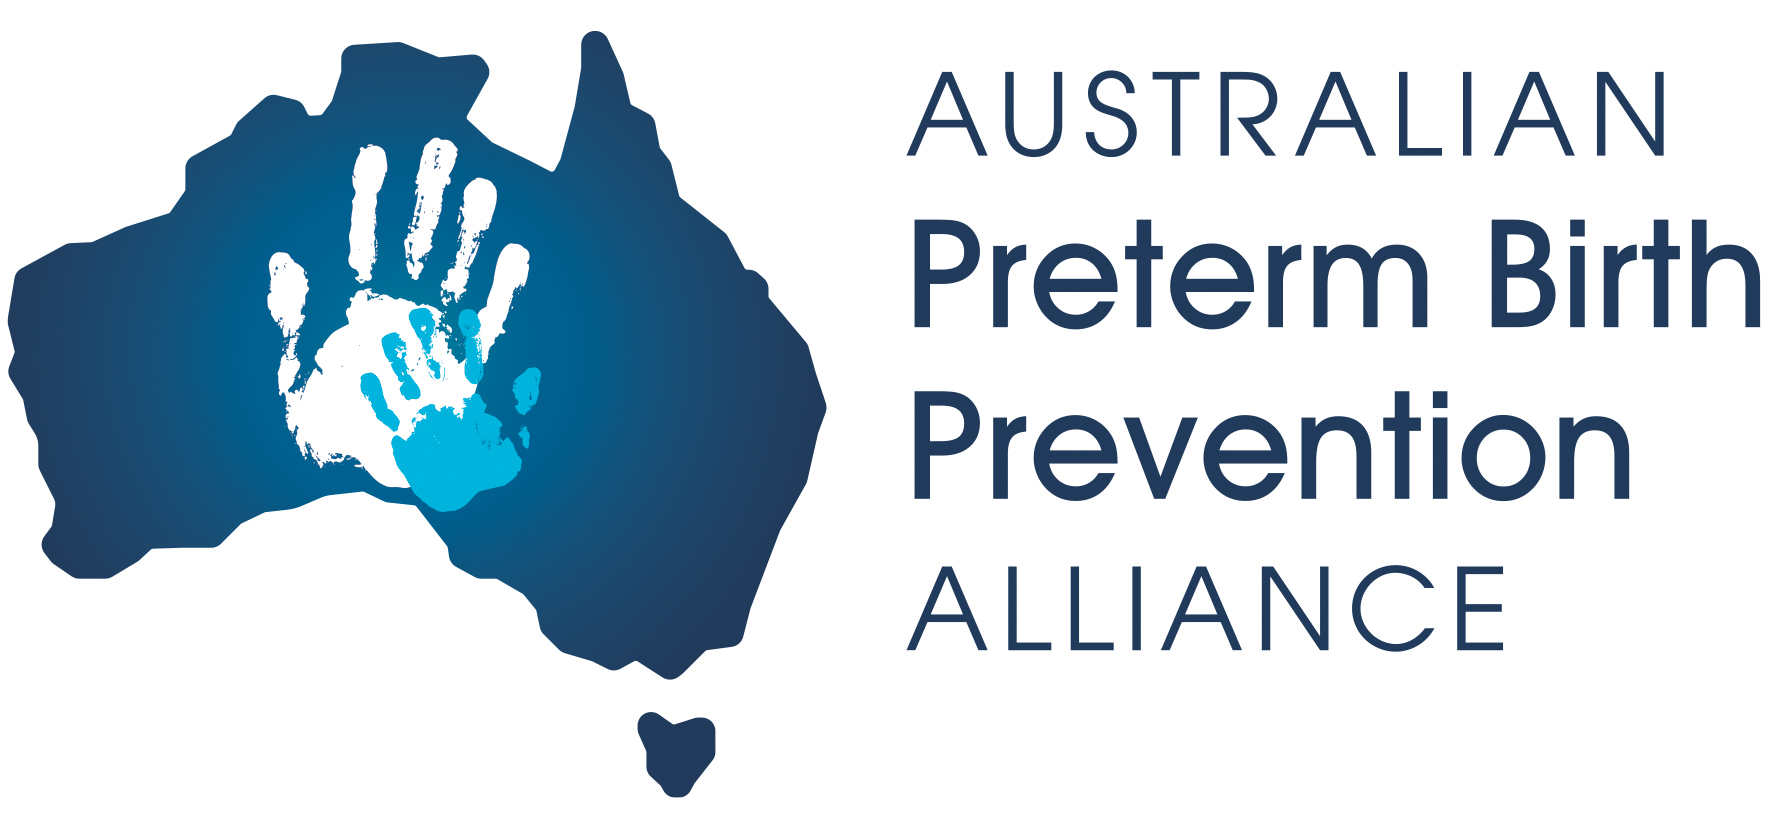 A national approach to preventing preterm birth